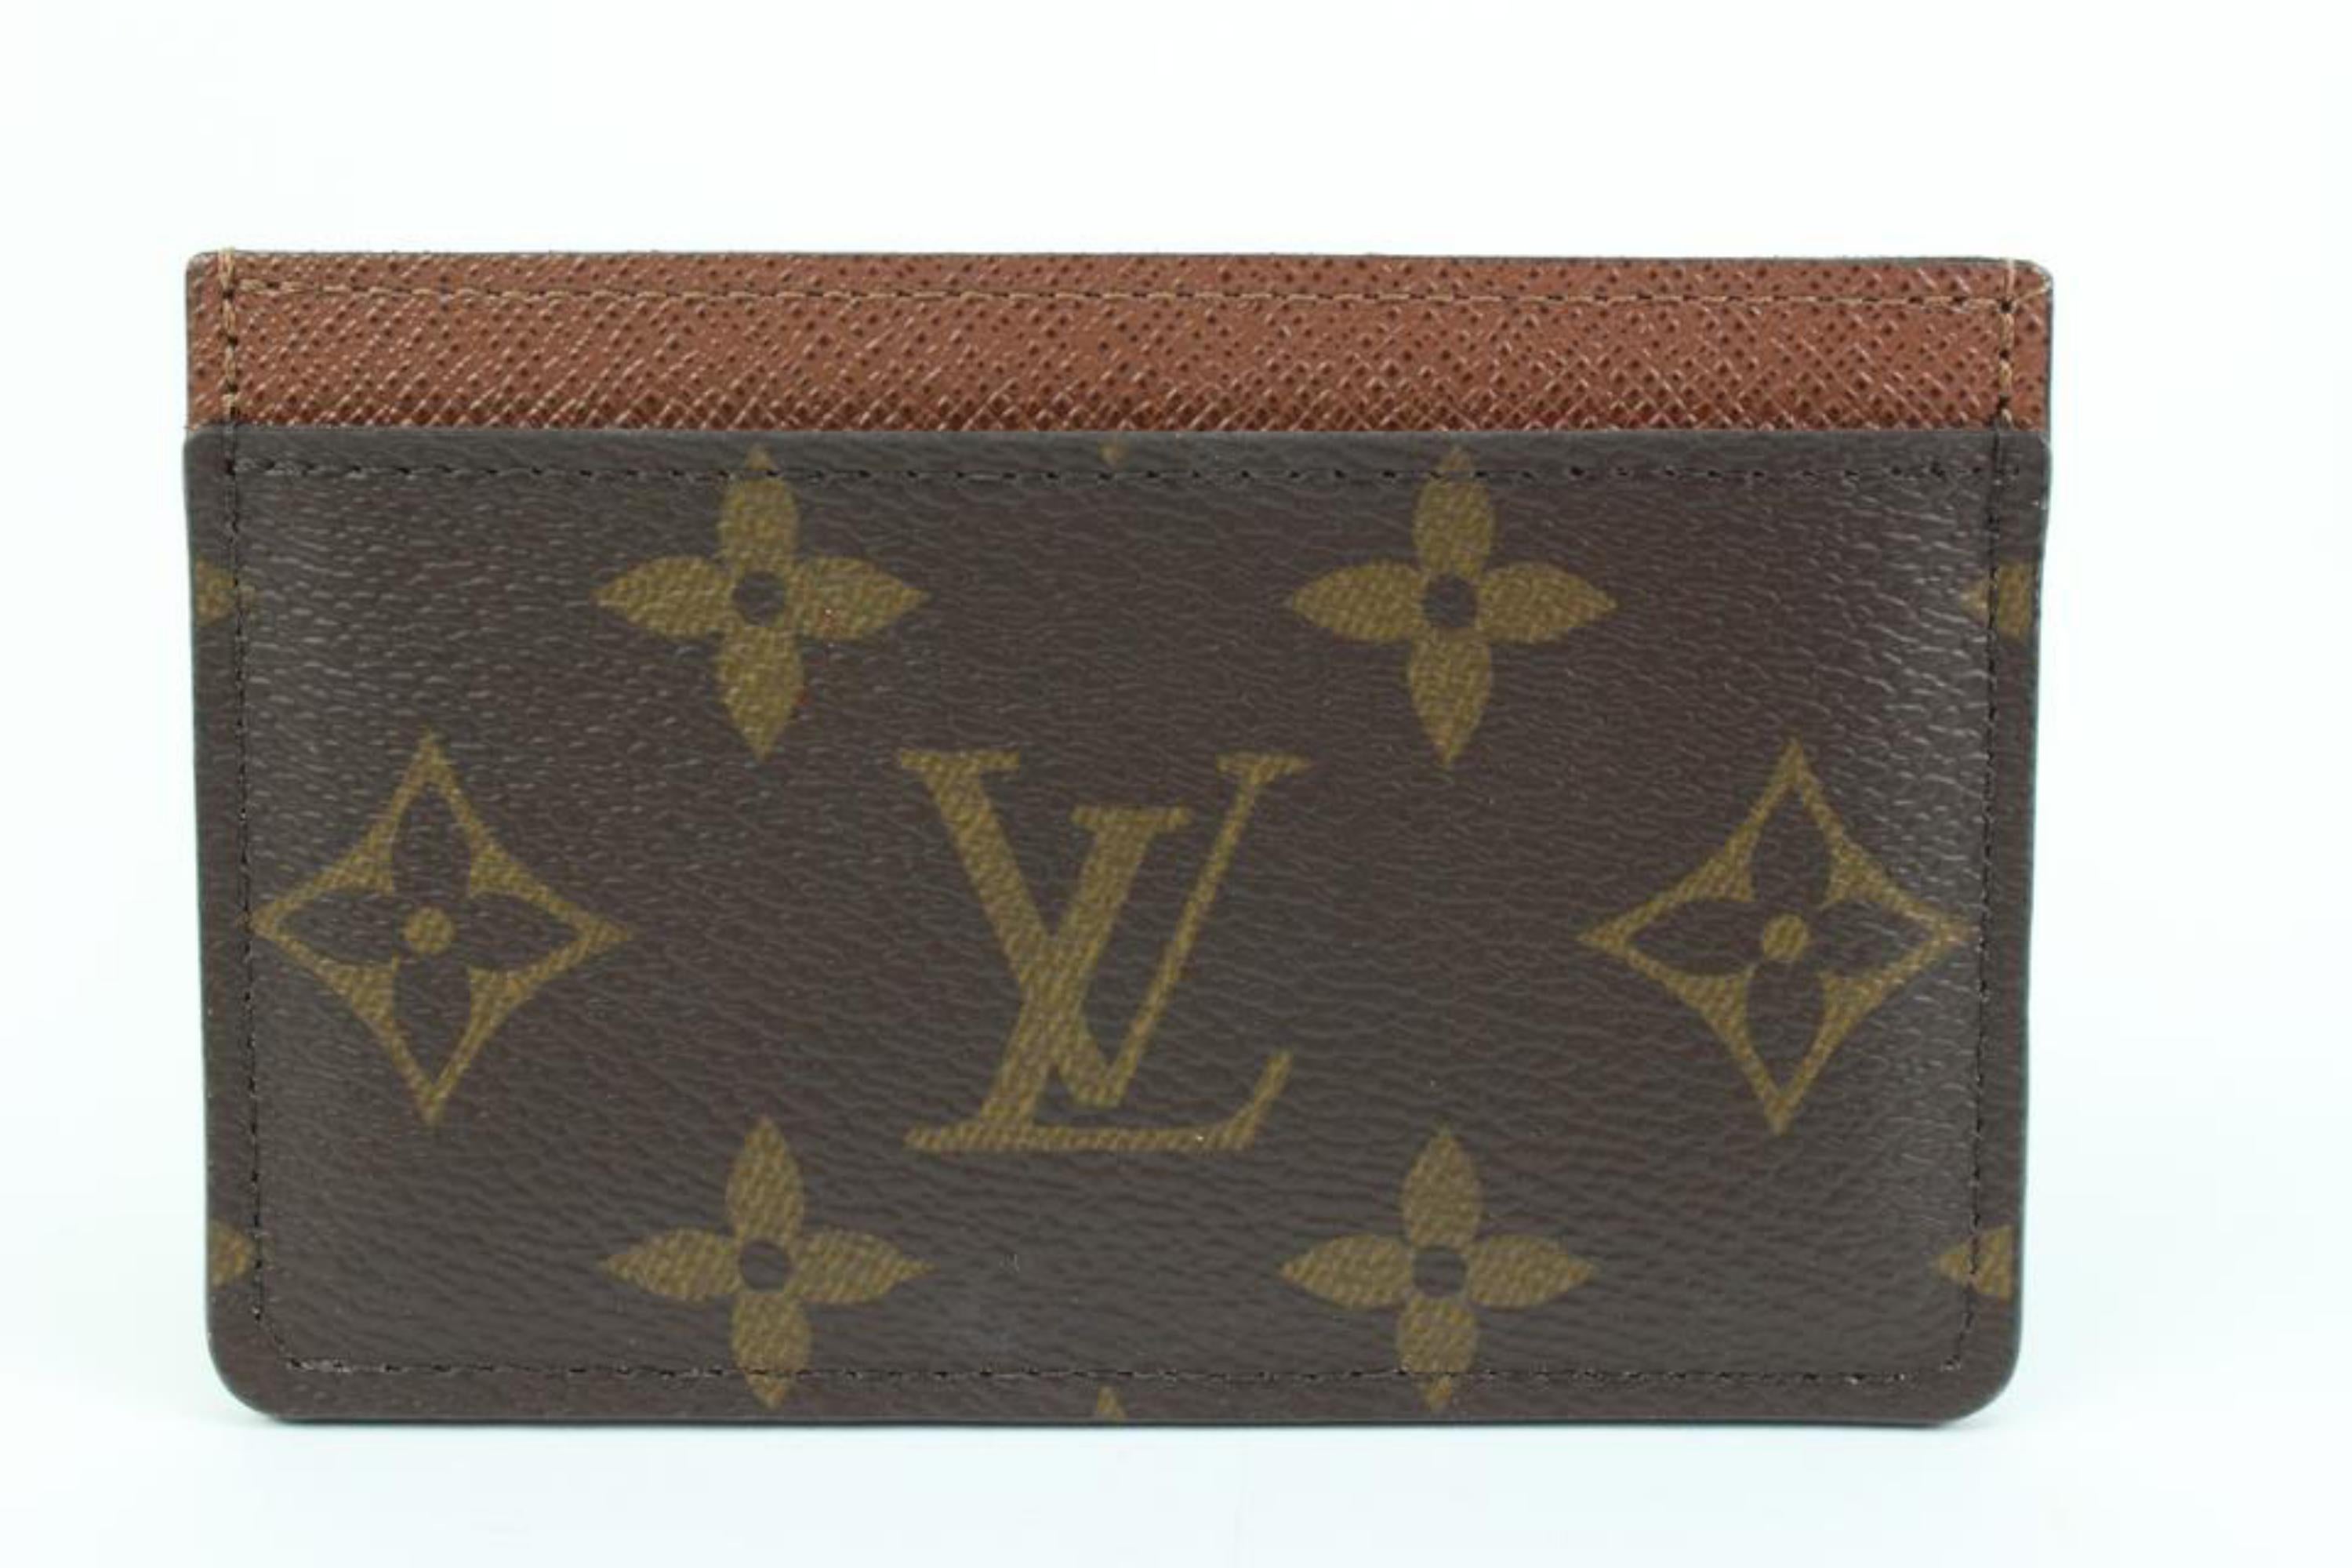 Louis Vuitton Monogram Porte Cartes Card Holder Wallet Case 53lk322s In Excellent Condition For Sale In Dix hills, NY